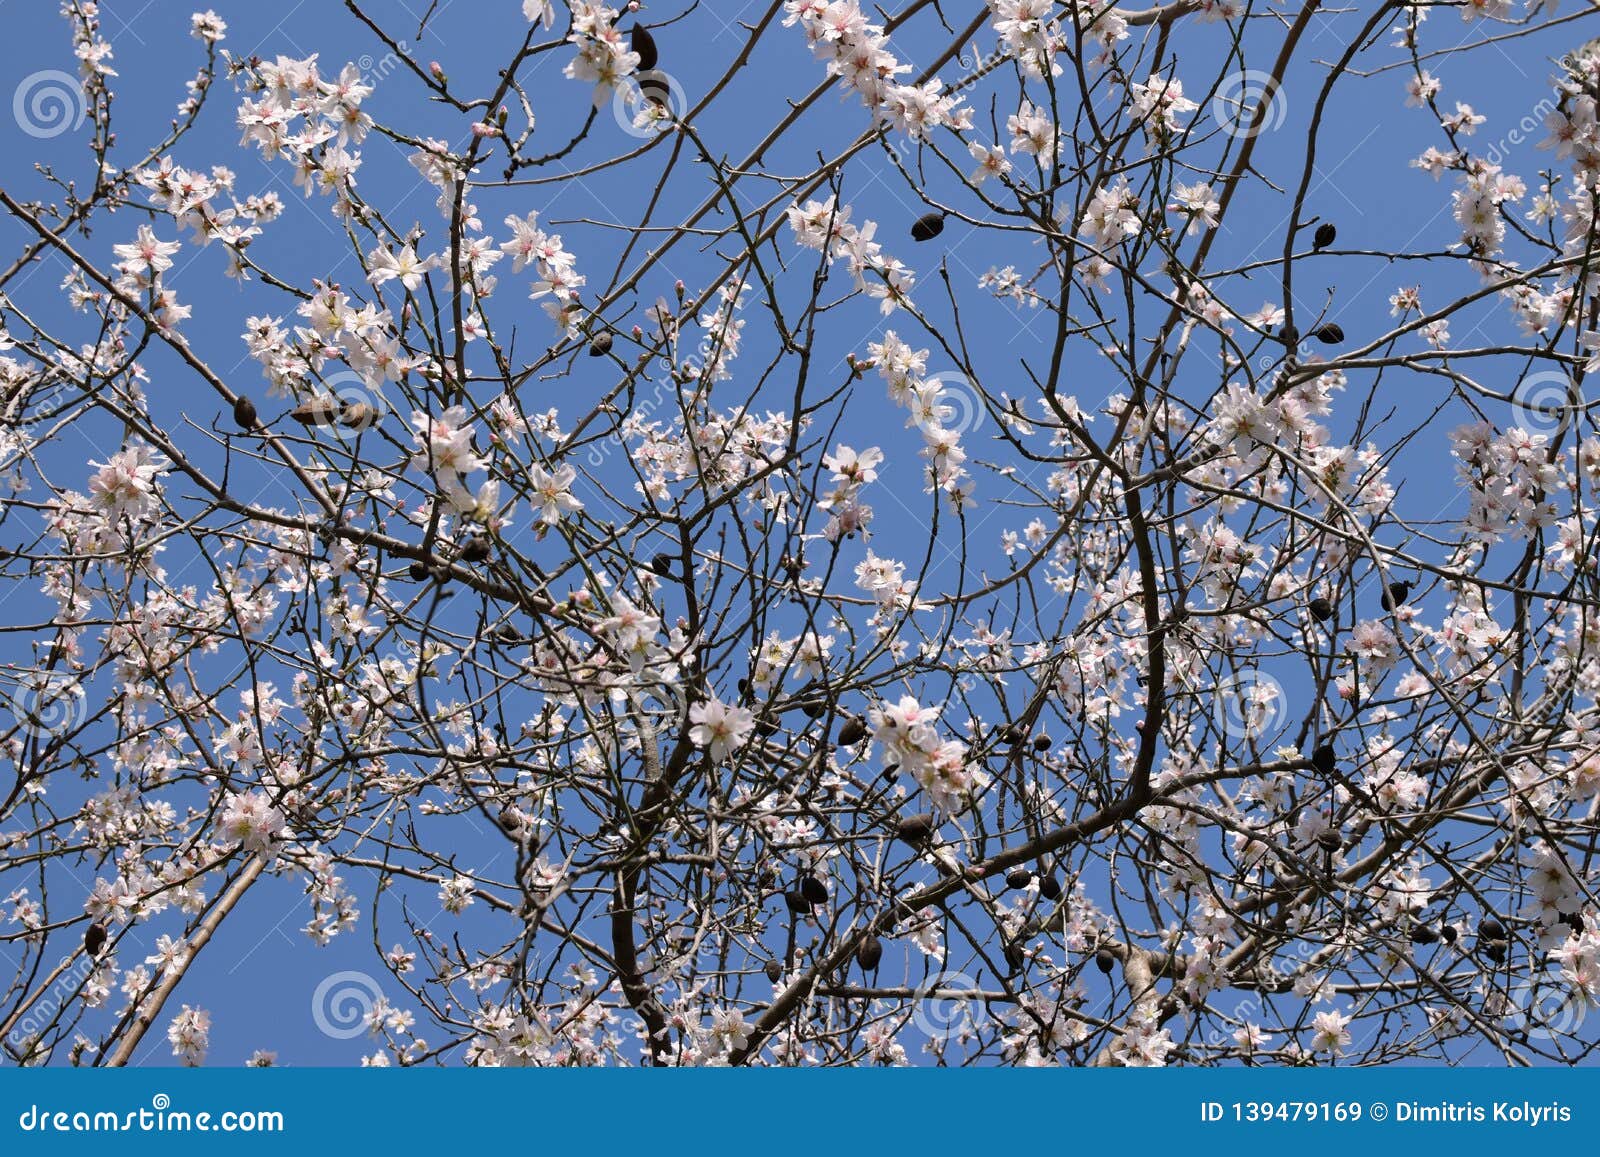 almond tree with flowers february